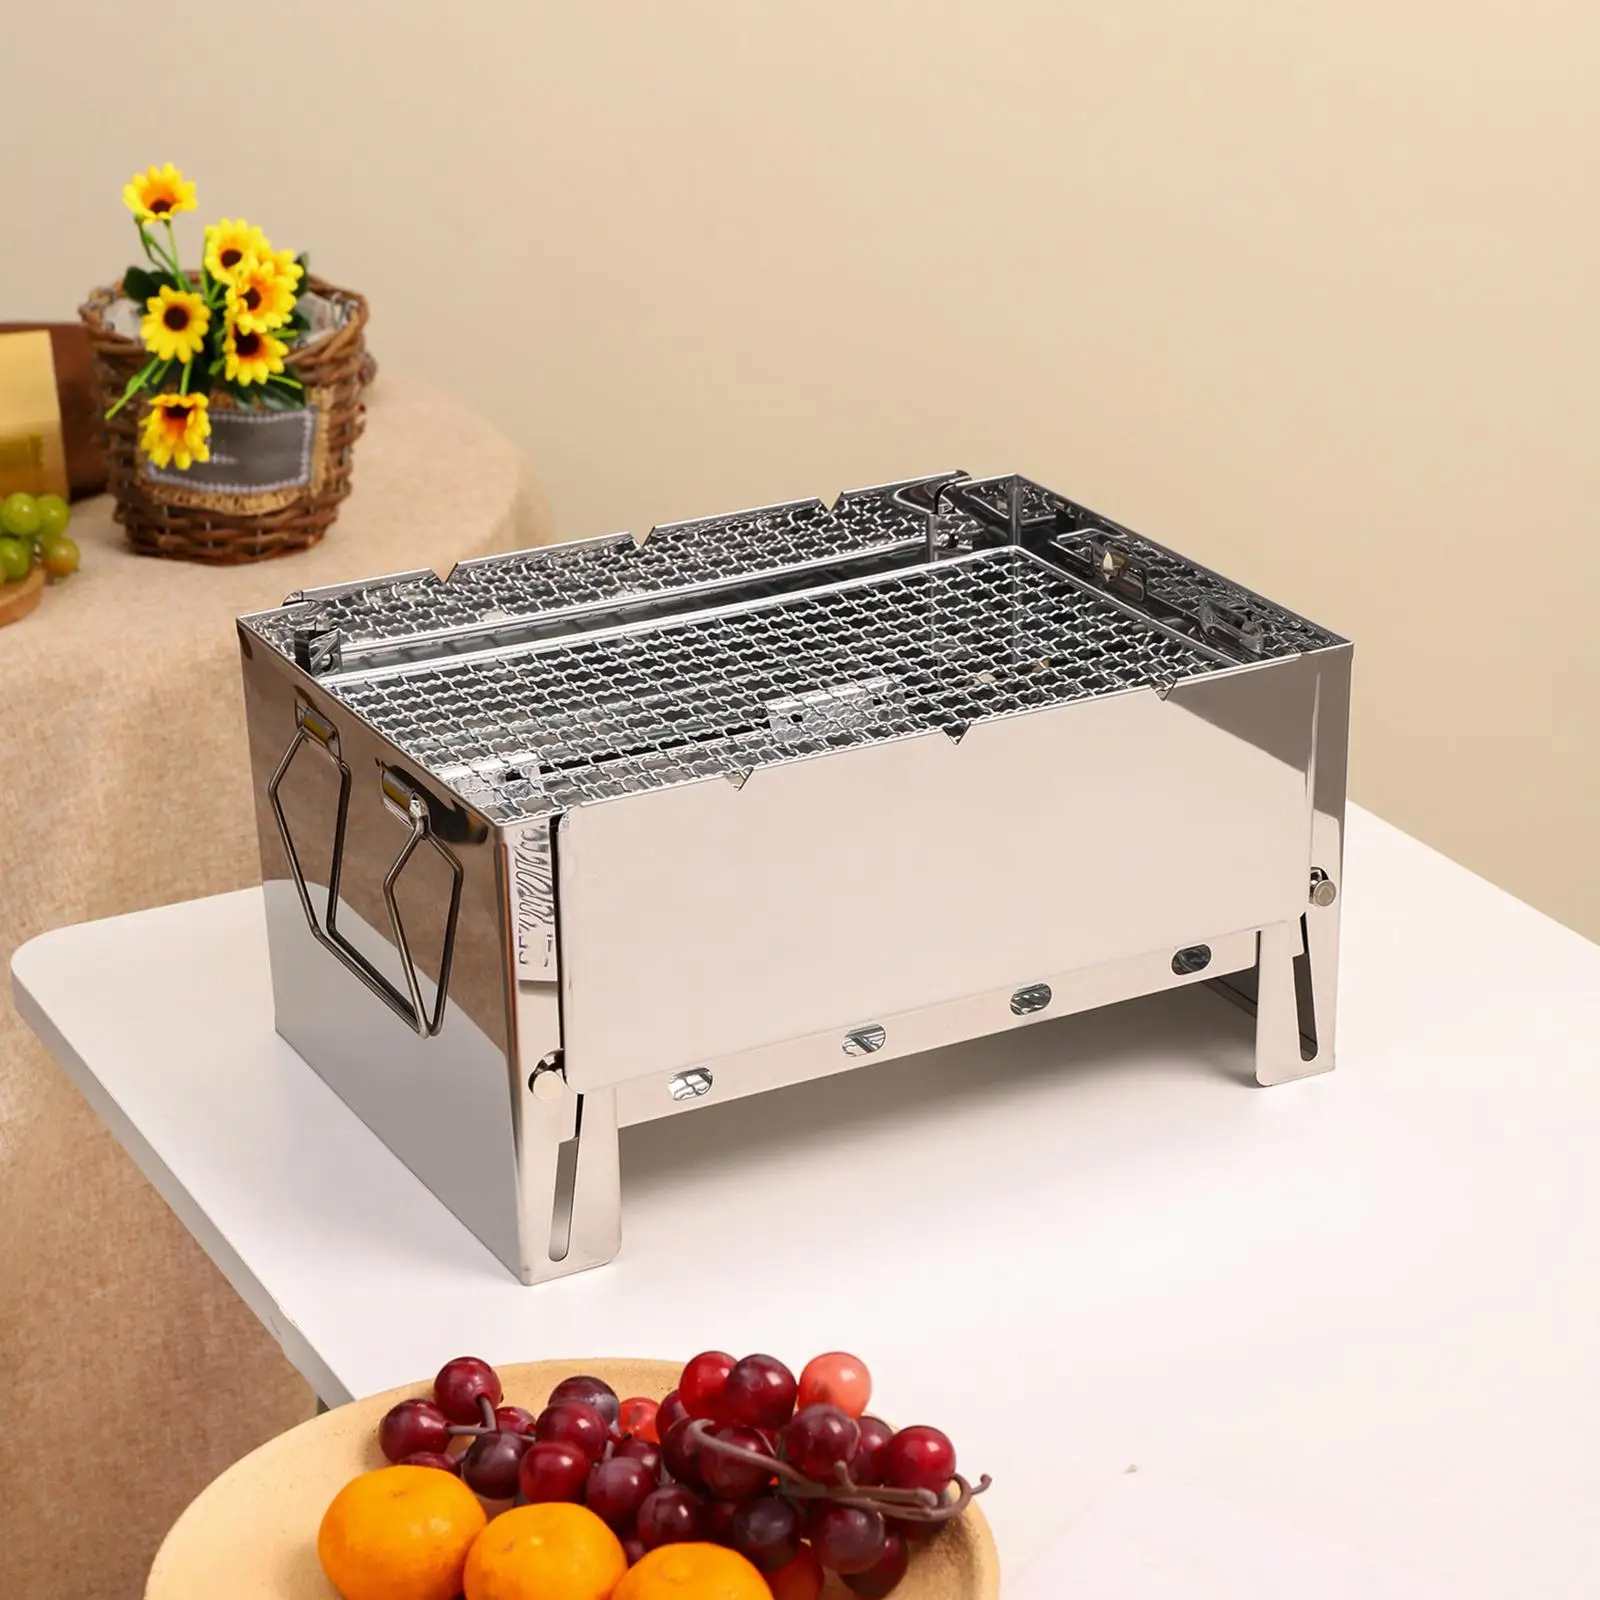 Barbecue Grill Foldable Stainless Steel for Outdoor Backpacking Travel